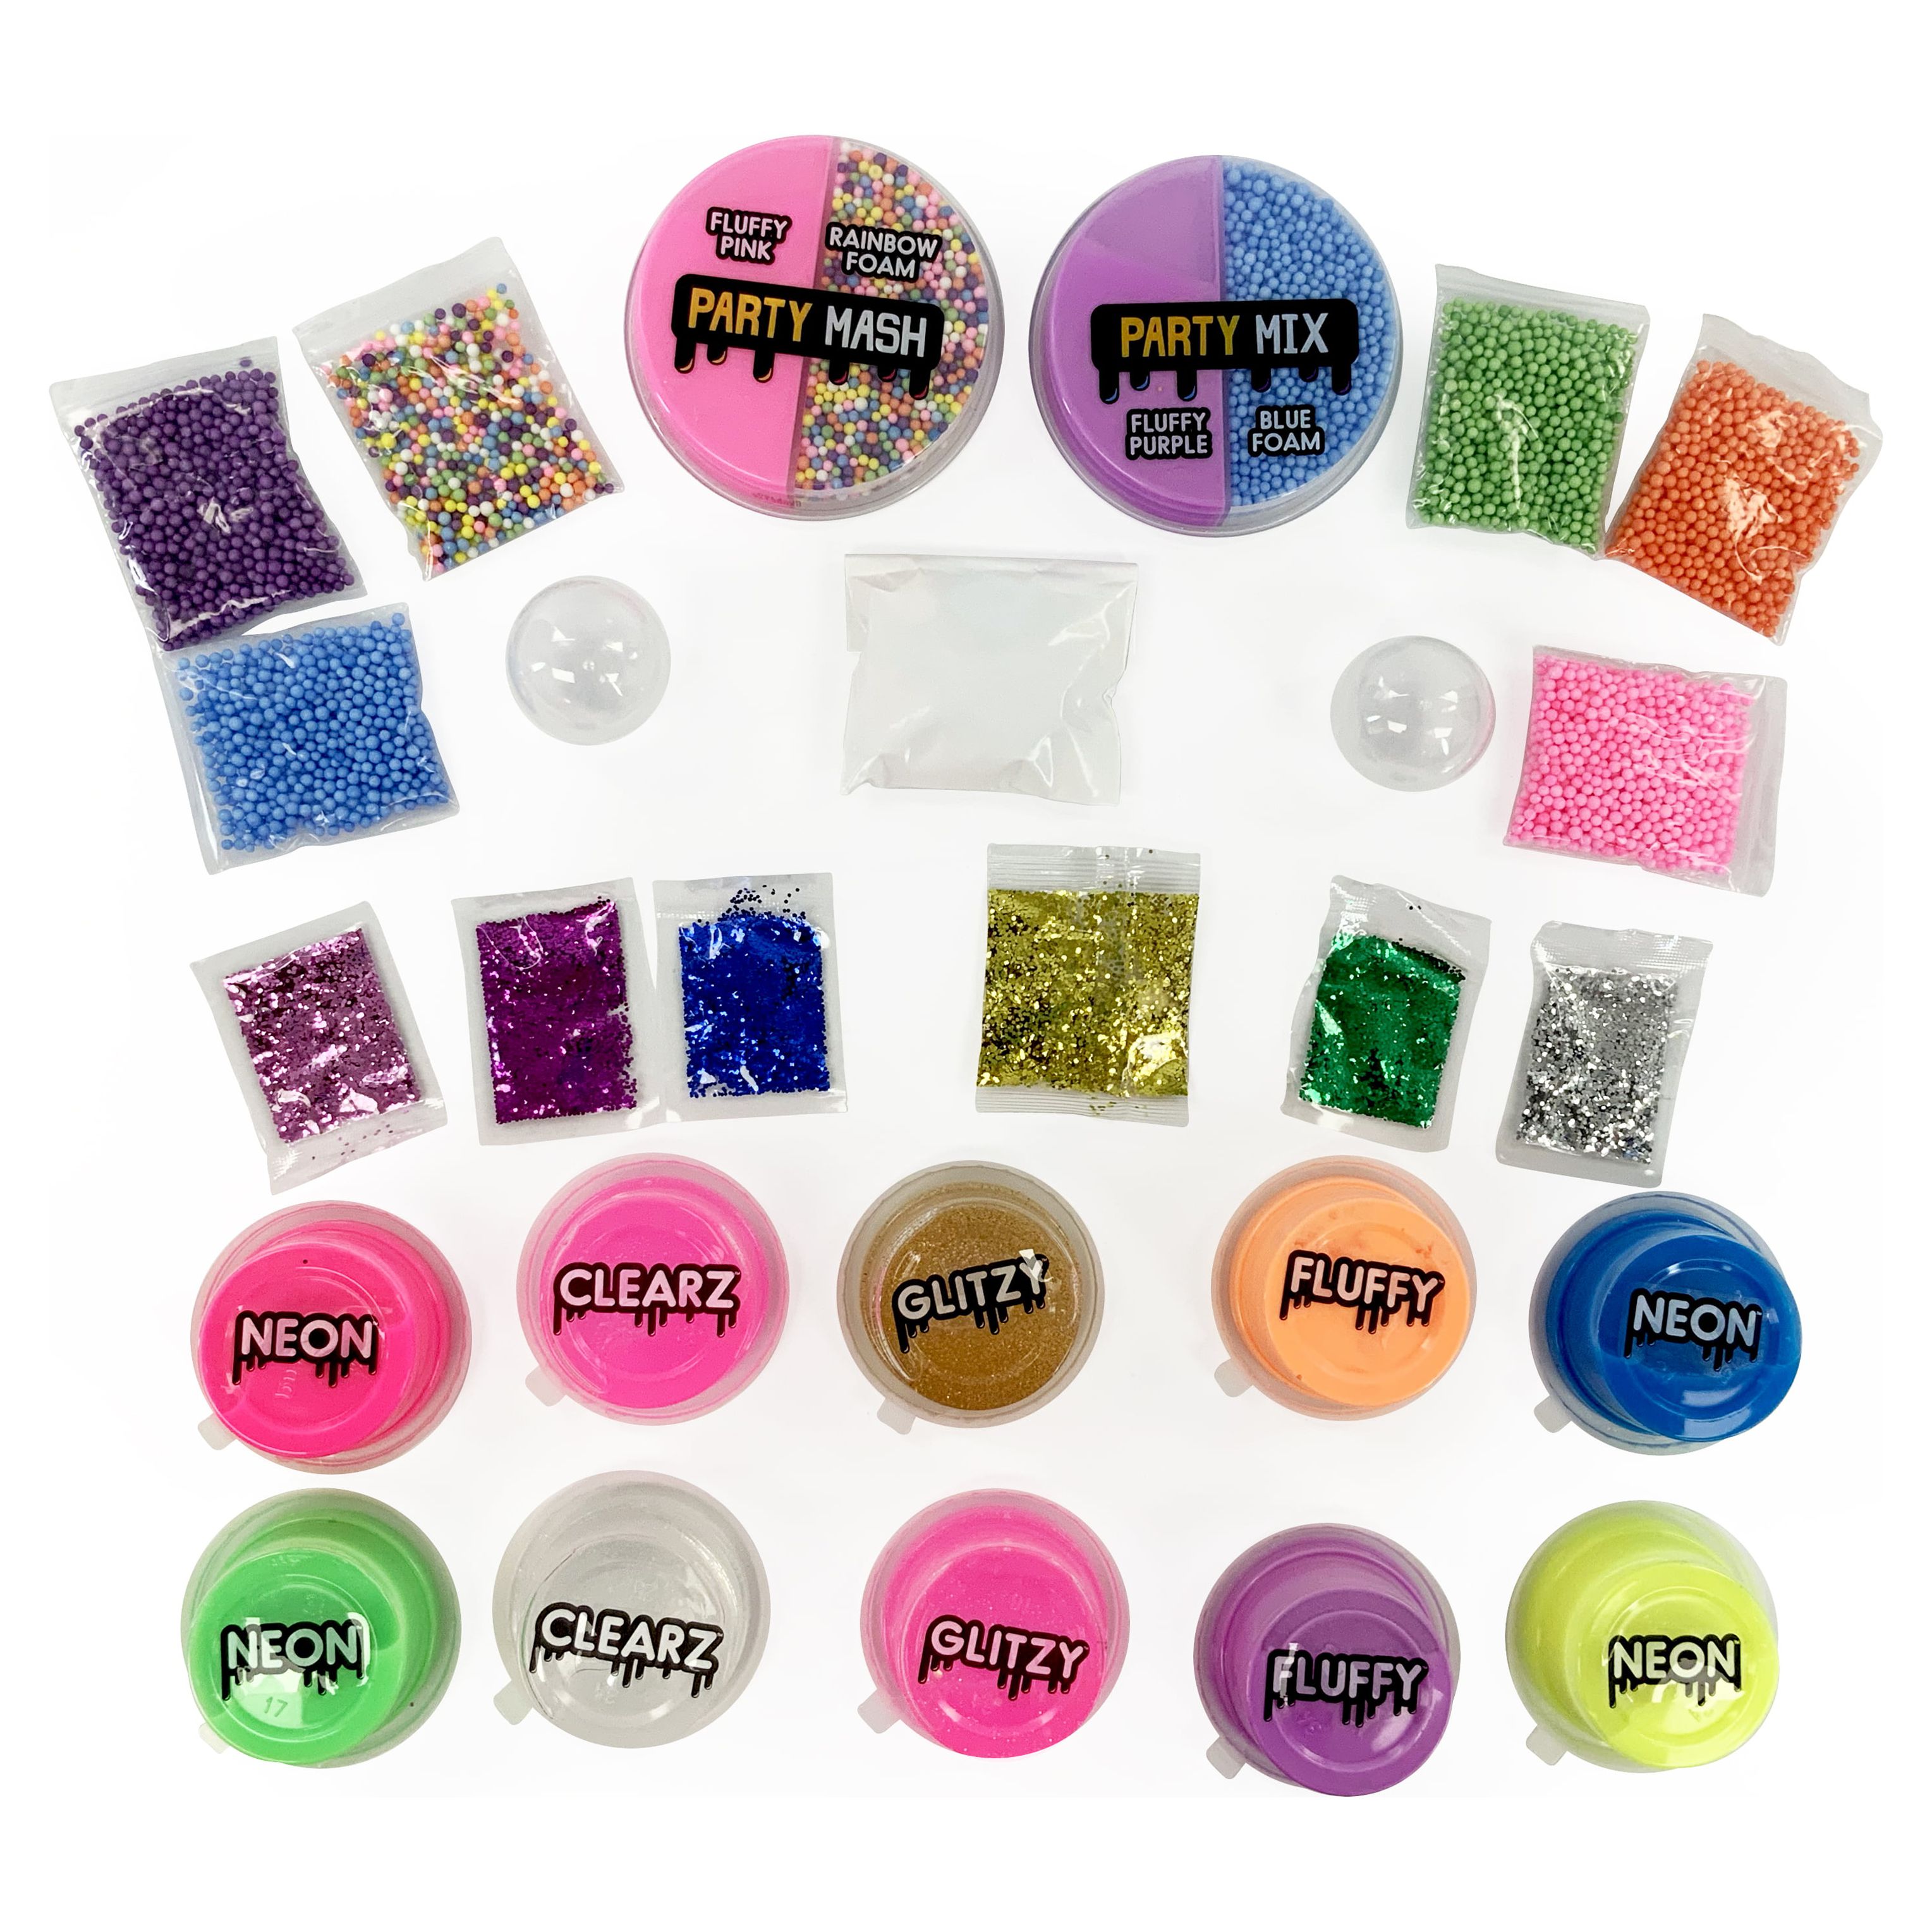 Compound Kings Mix & Mash Super Ultimate Deluxe Party Slime Kit! 8.8 oz and 8 Glitter mix-ins and more! - image 3 of 6